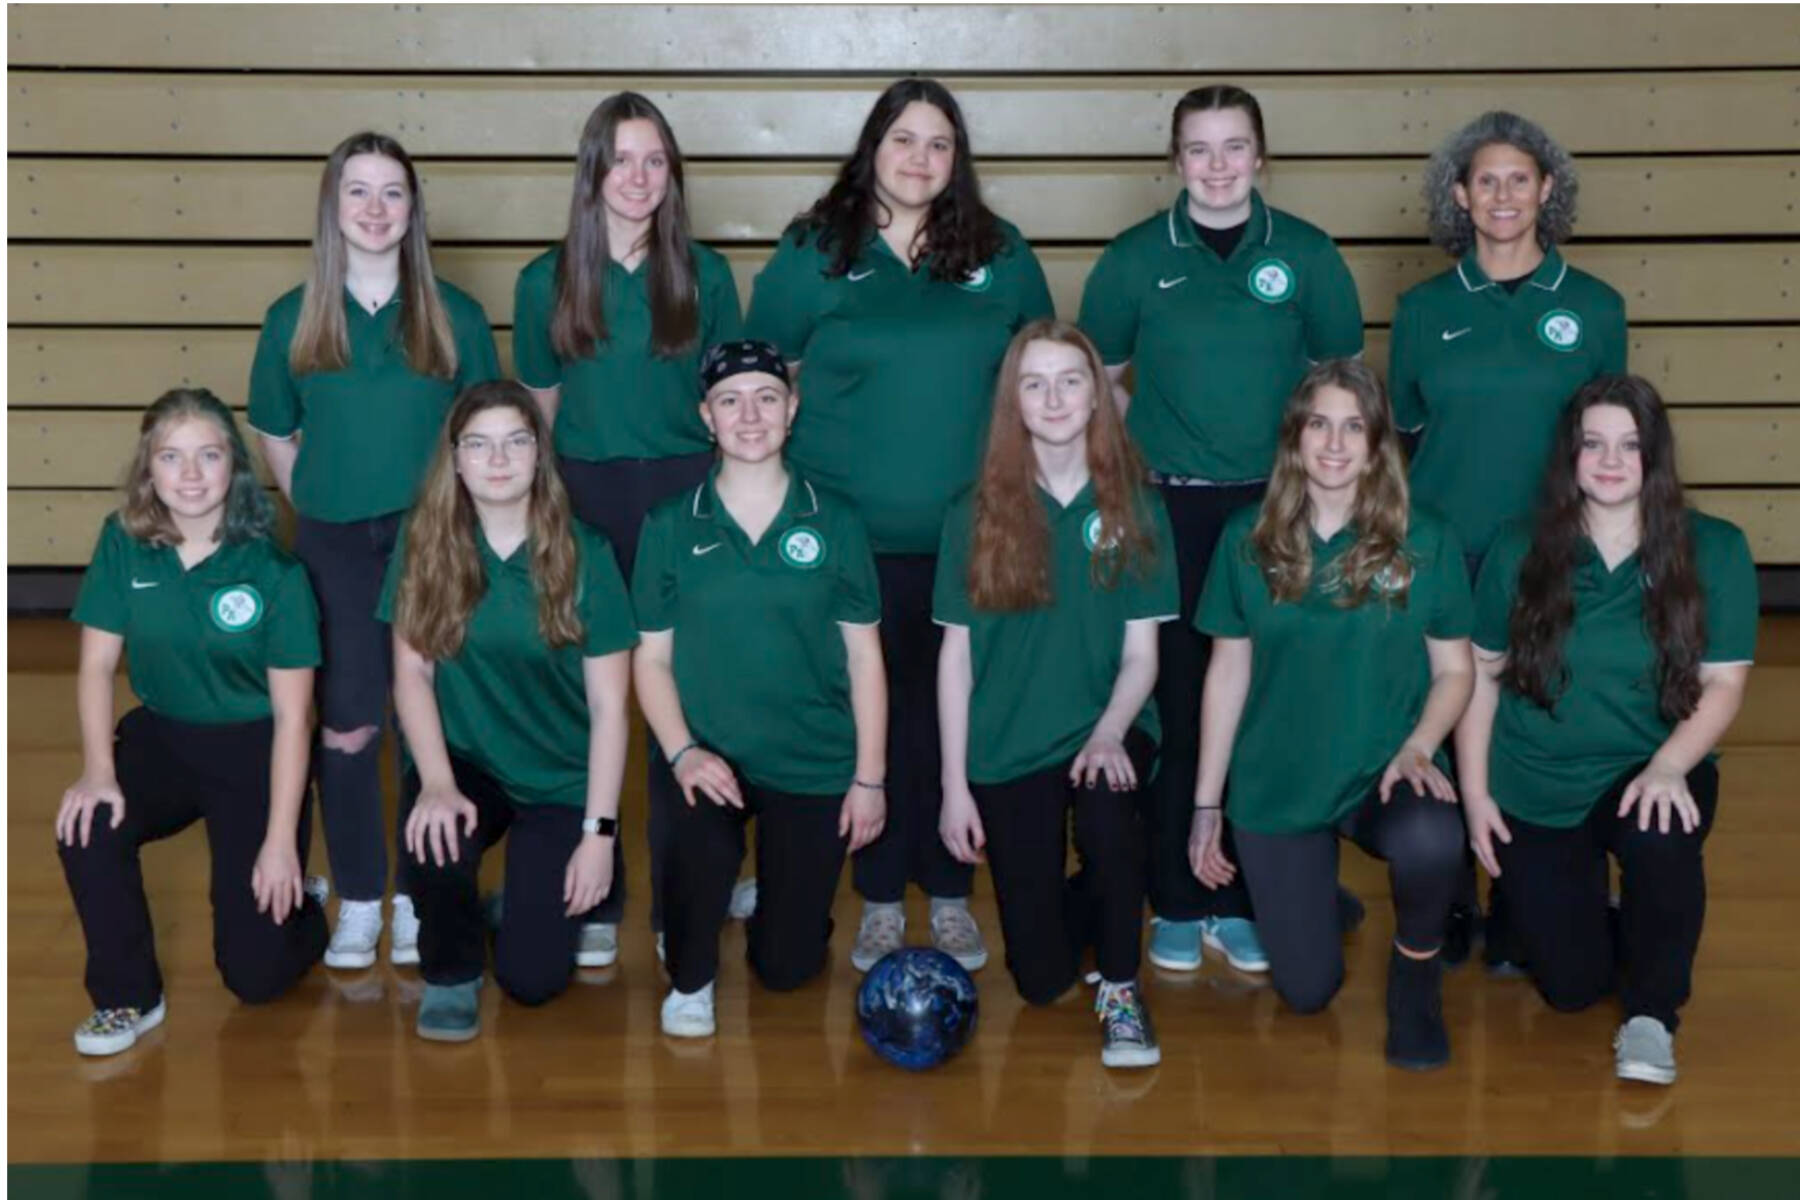 The Port Angeles girls bowling team. From left, front, are Zoey Van Gordon, Izzy Spencer, Violet Mills, Kenadie Ring, Paige Pangaro and Abby Rudd. From left, rear, are Lily Thomas, Natalie Robinson, Abby Robinson, Taylor Worthington and Coach Rebecca Gundersen. Not pictured is Sophie Constant.